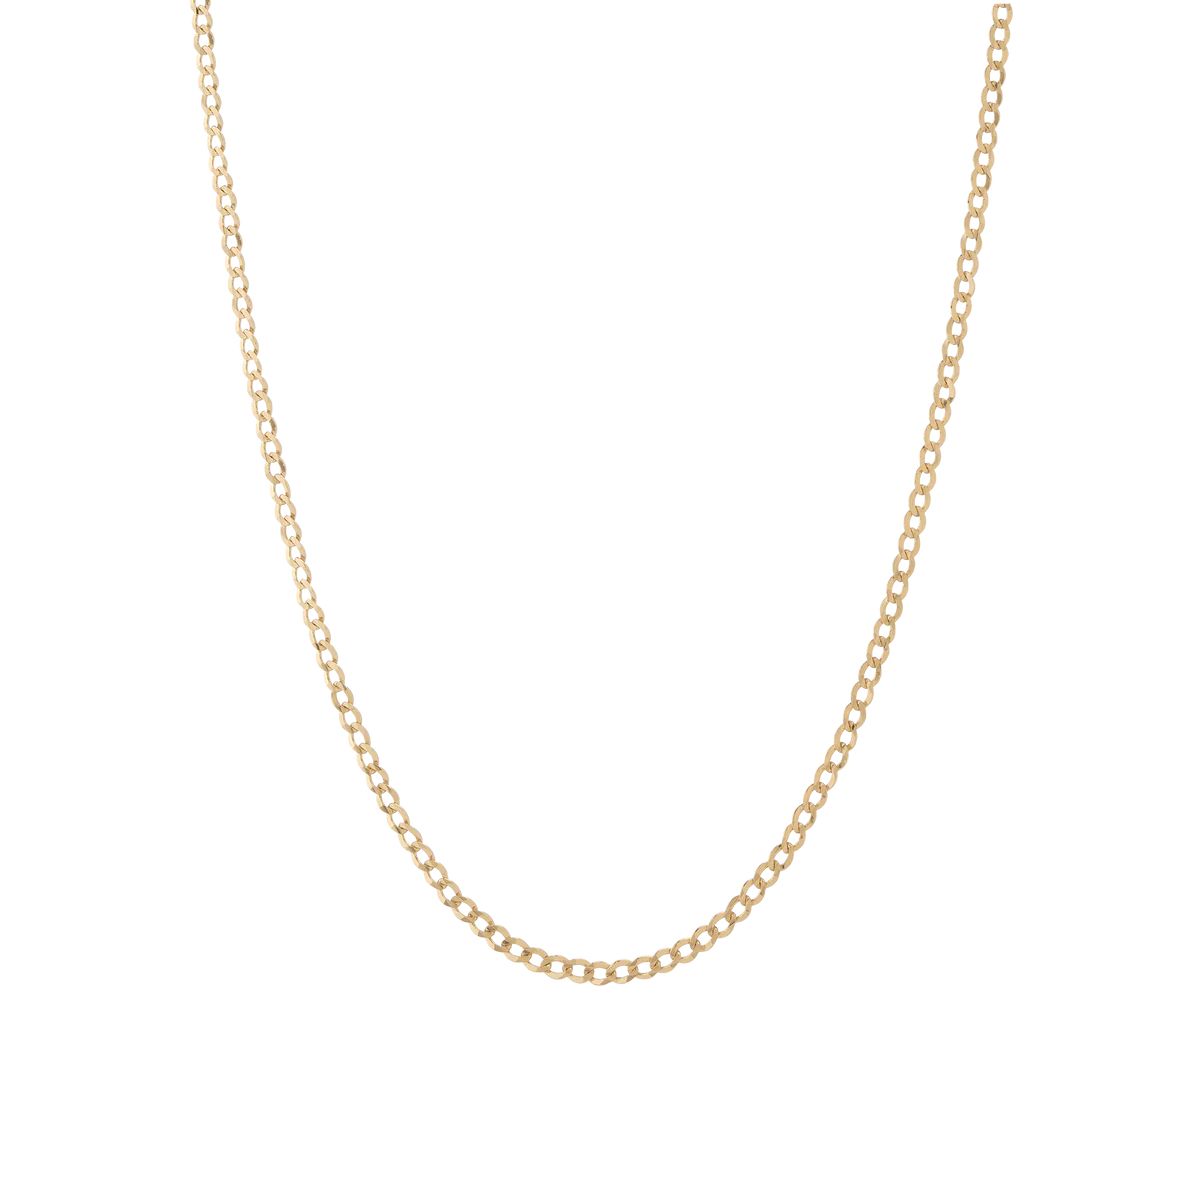 Medium Gold Curb Chain Necklace | AUrate New York